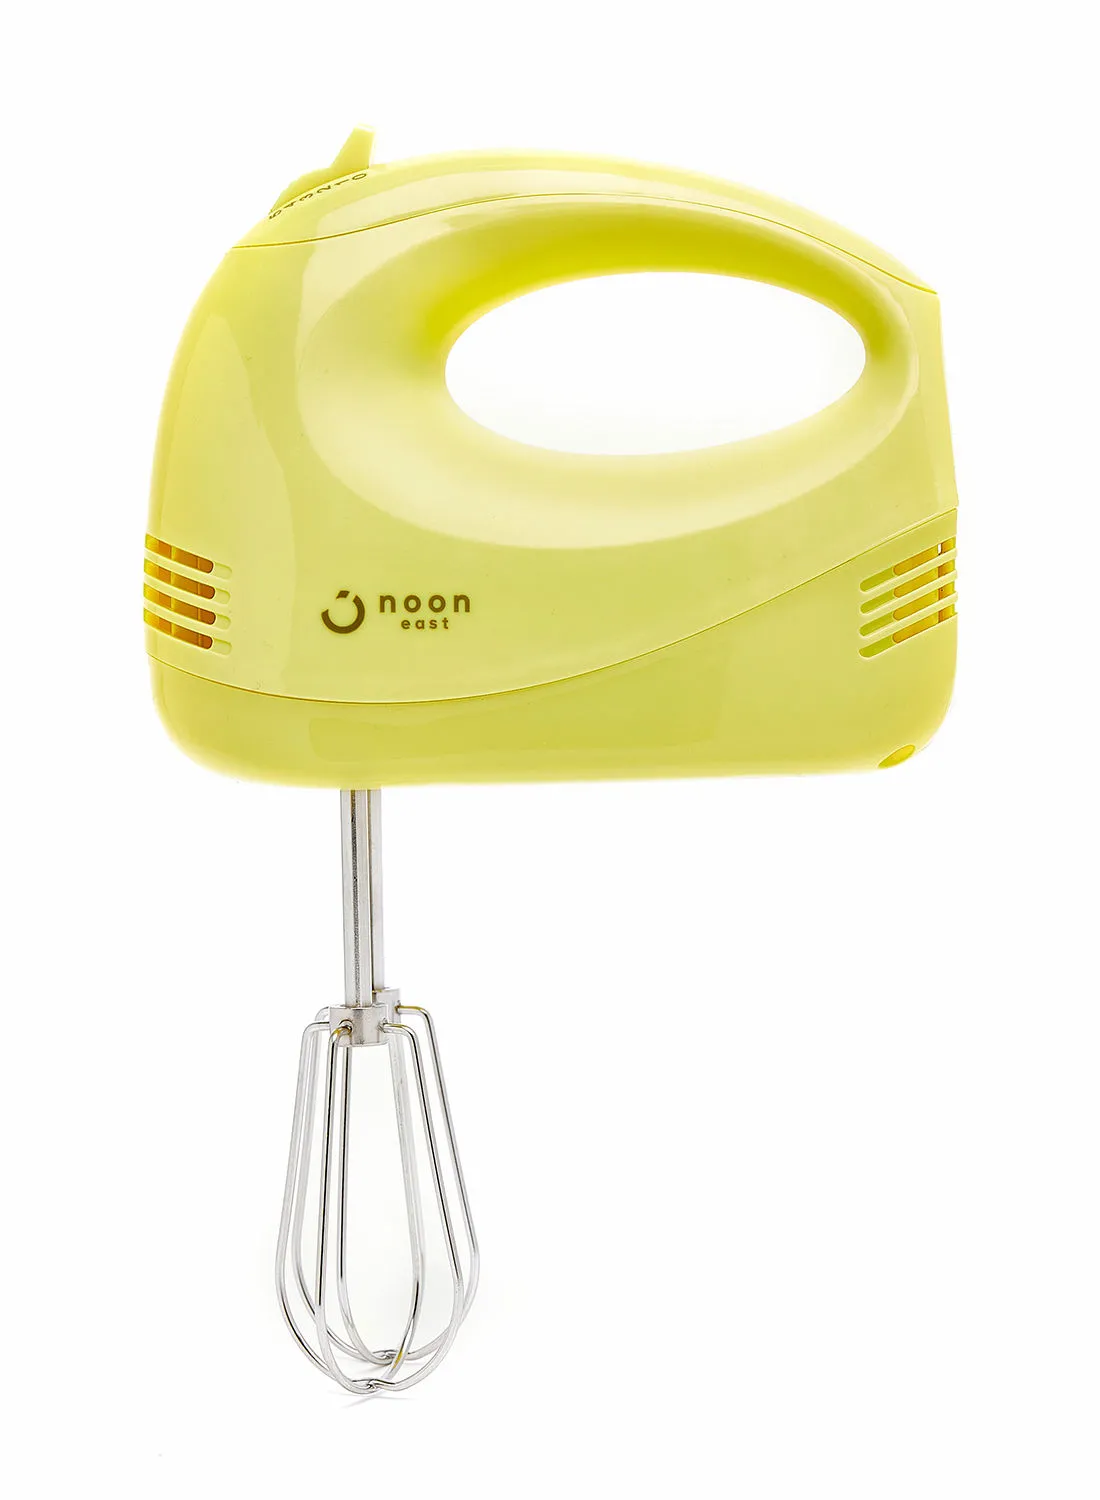 noon east Electric Hand Mixer And Blender - 120 W 5 Speed- Yellow